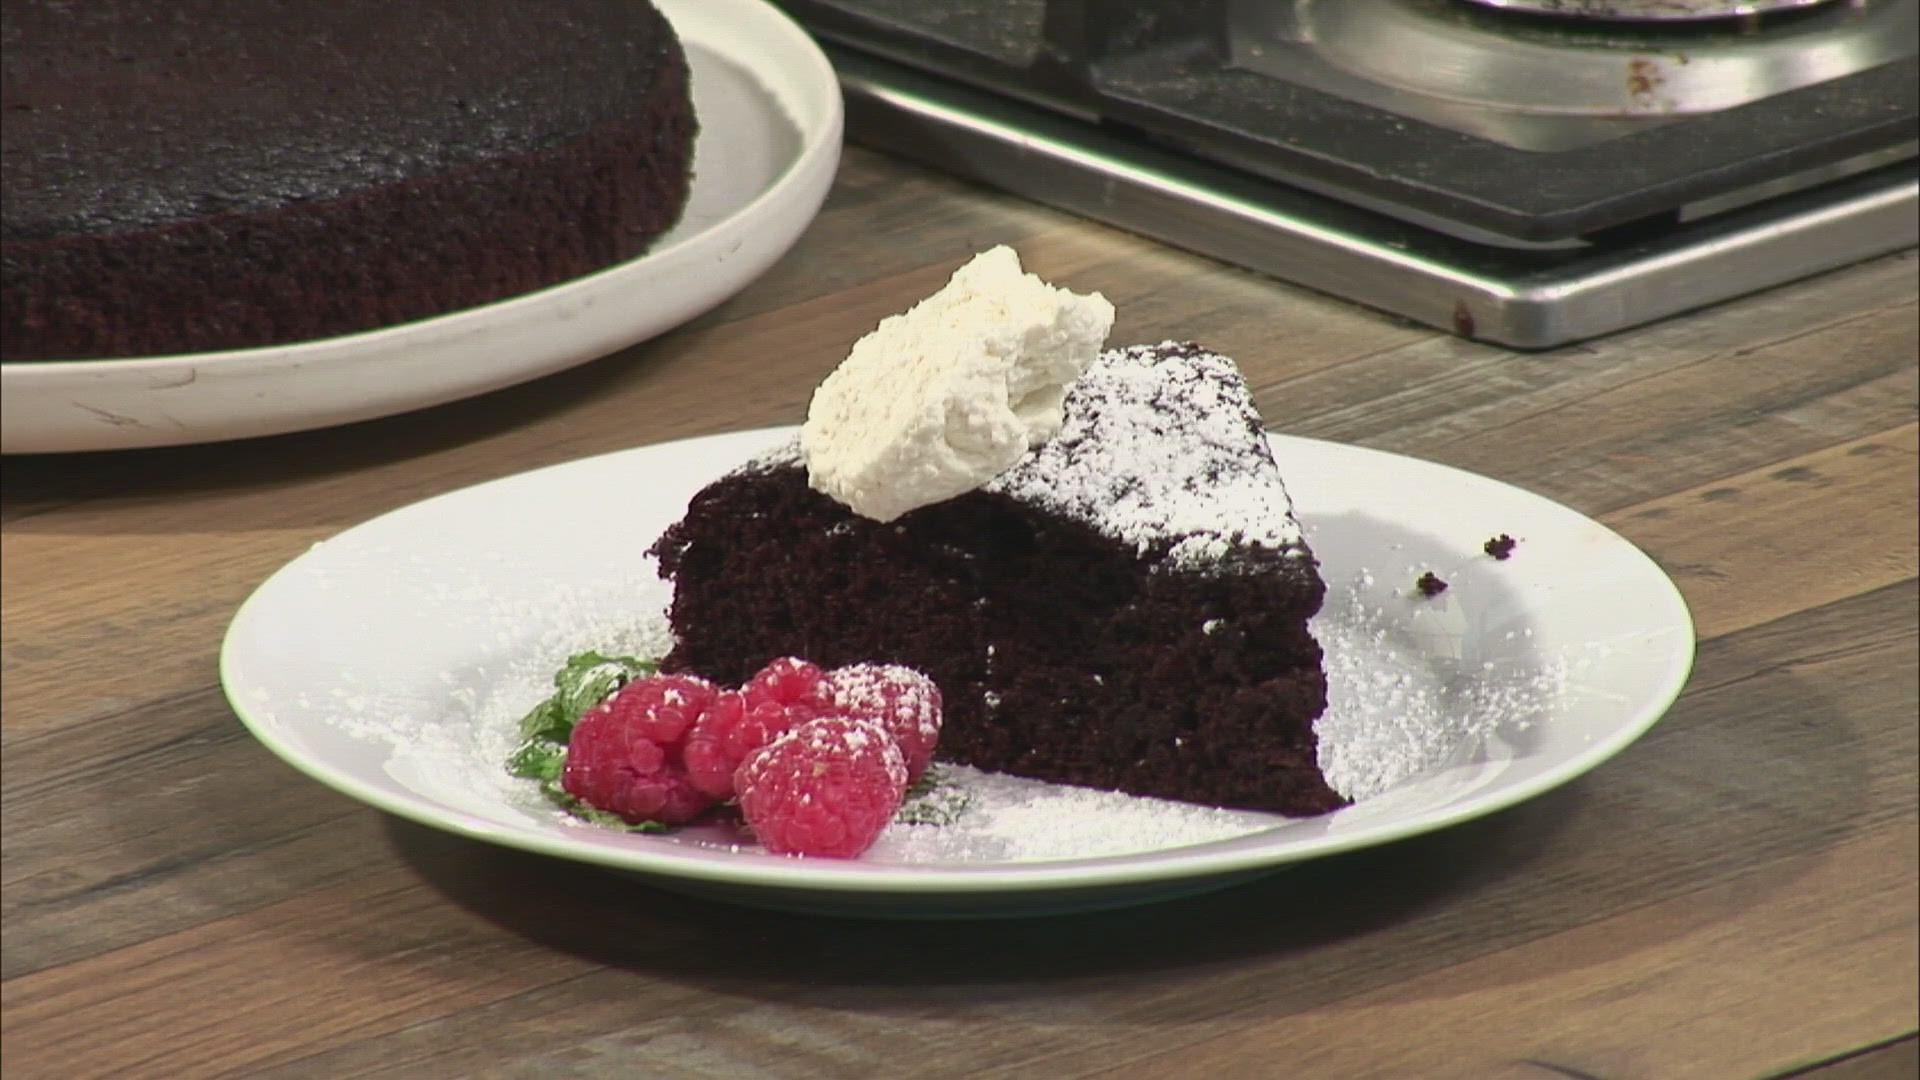 Kate Shaffer of Ragged Coast Chocolate and author of "Desserted: Recipes and Tales from an Island Chocolatier" joins 207 in the kitchen to share one of her recipes.